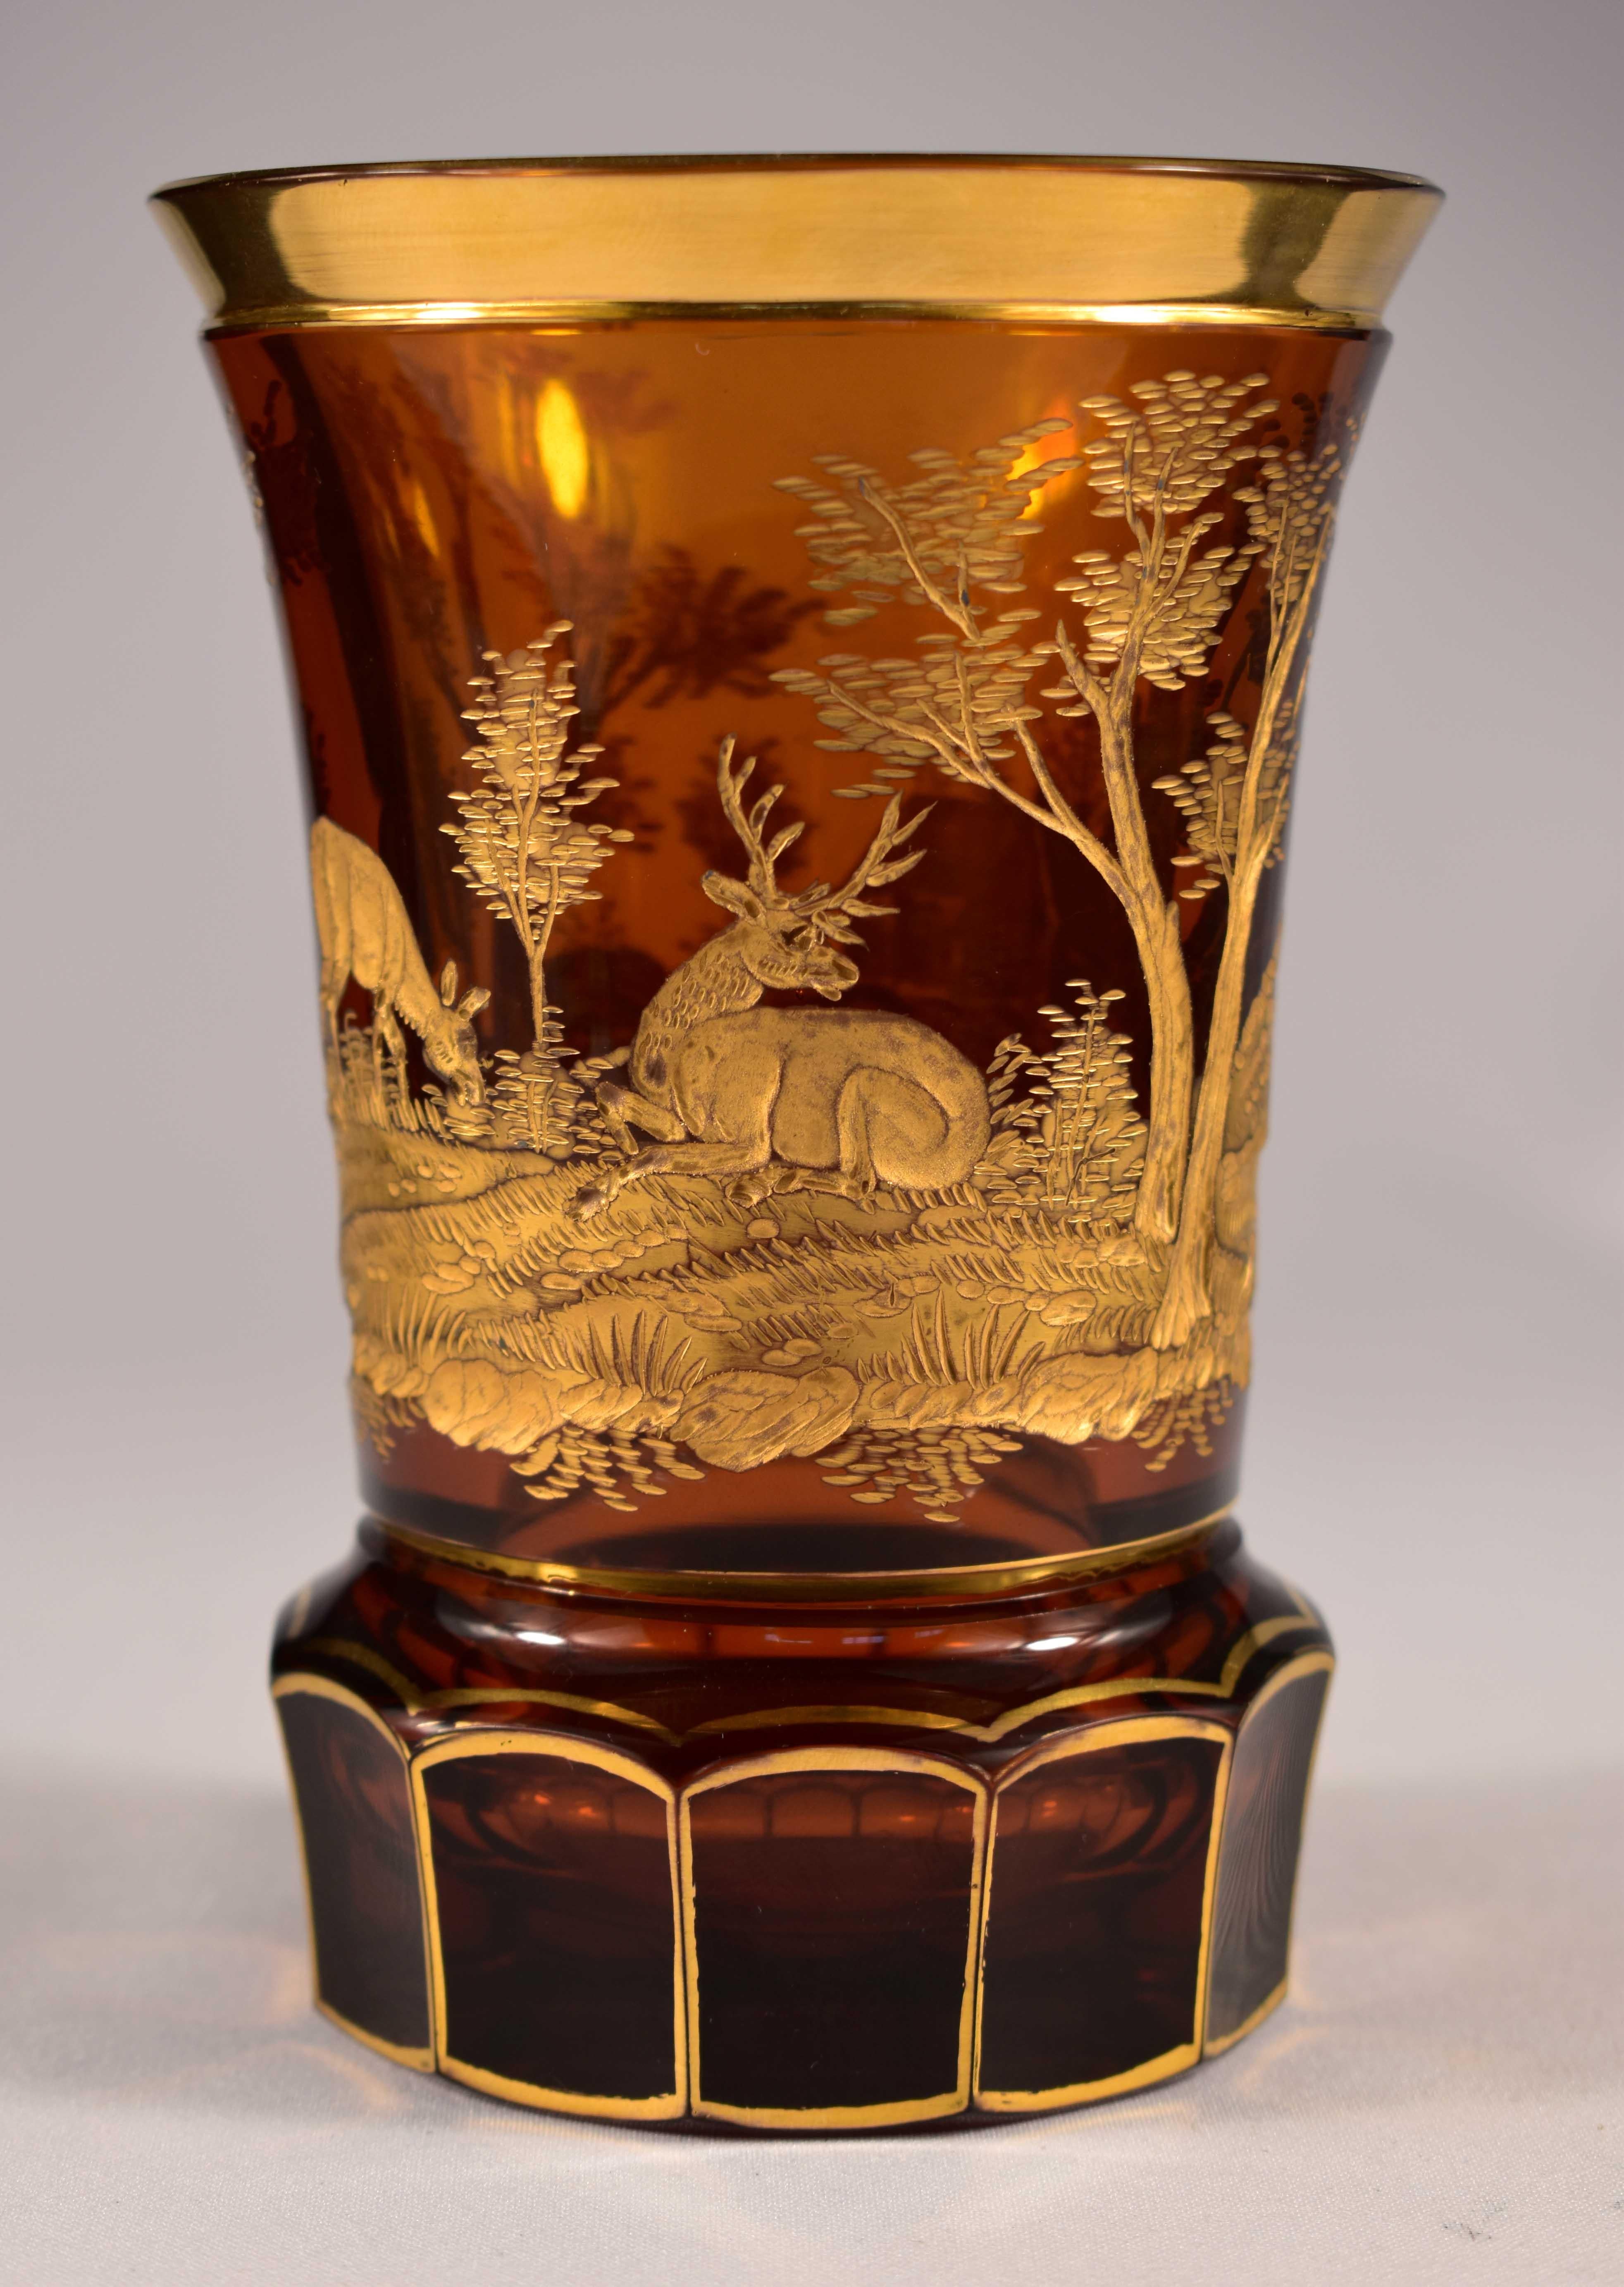 Beautiful goblet made of amber glass, gilded engraving with a hunting motif, 20th century Bohemian Glass- Undamaged.